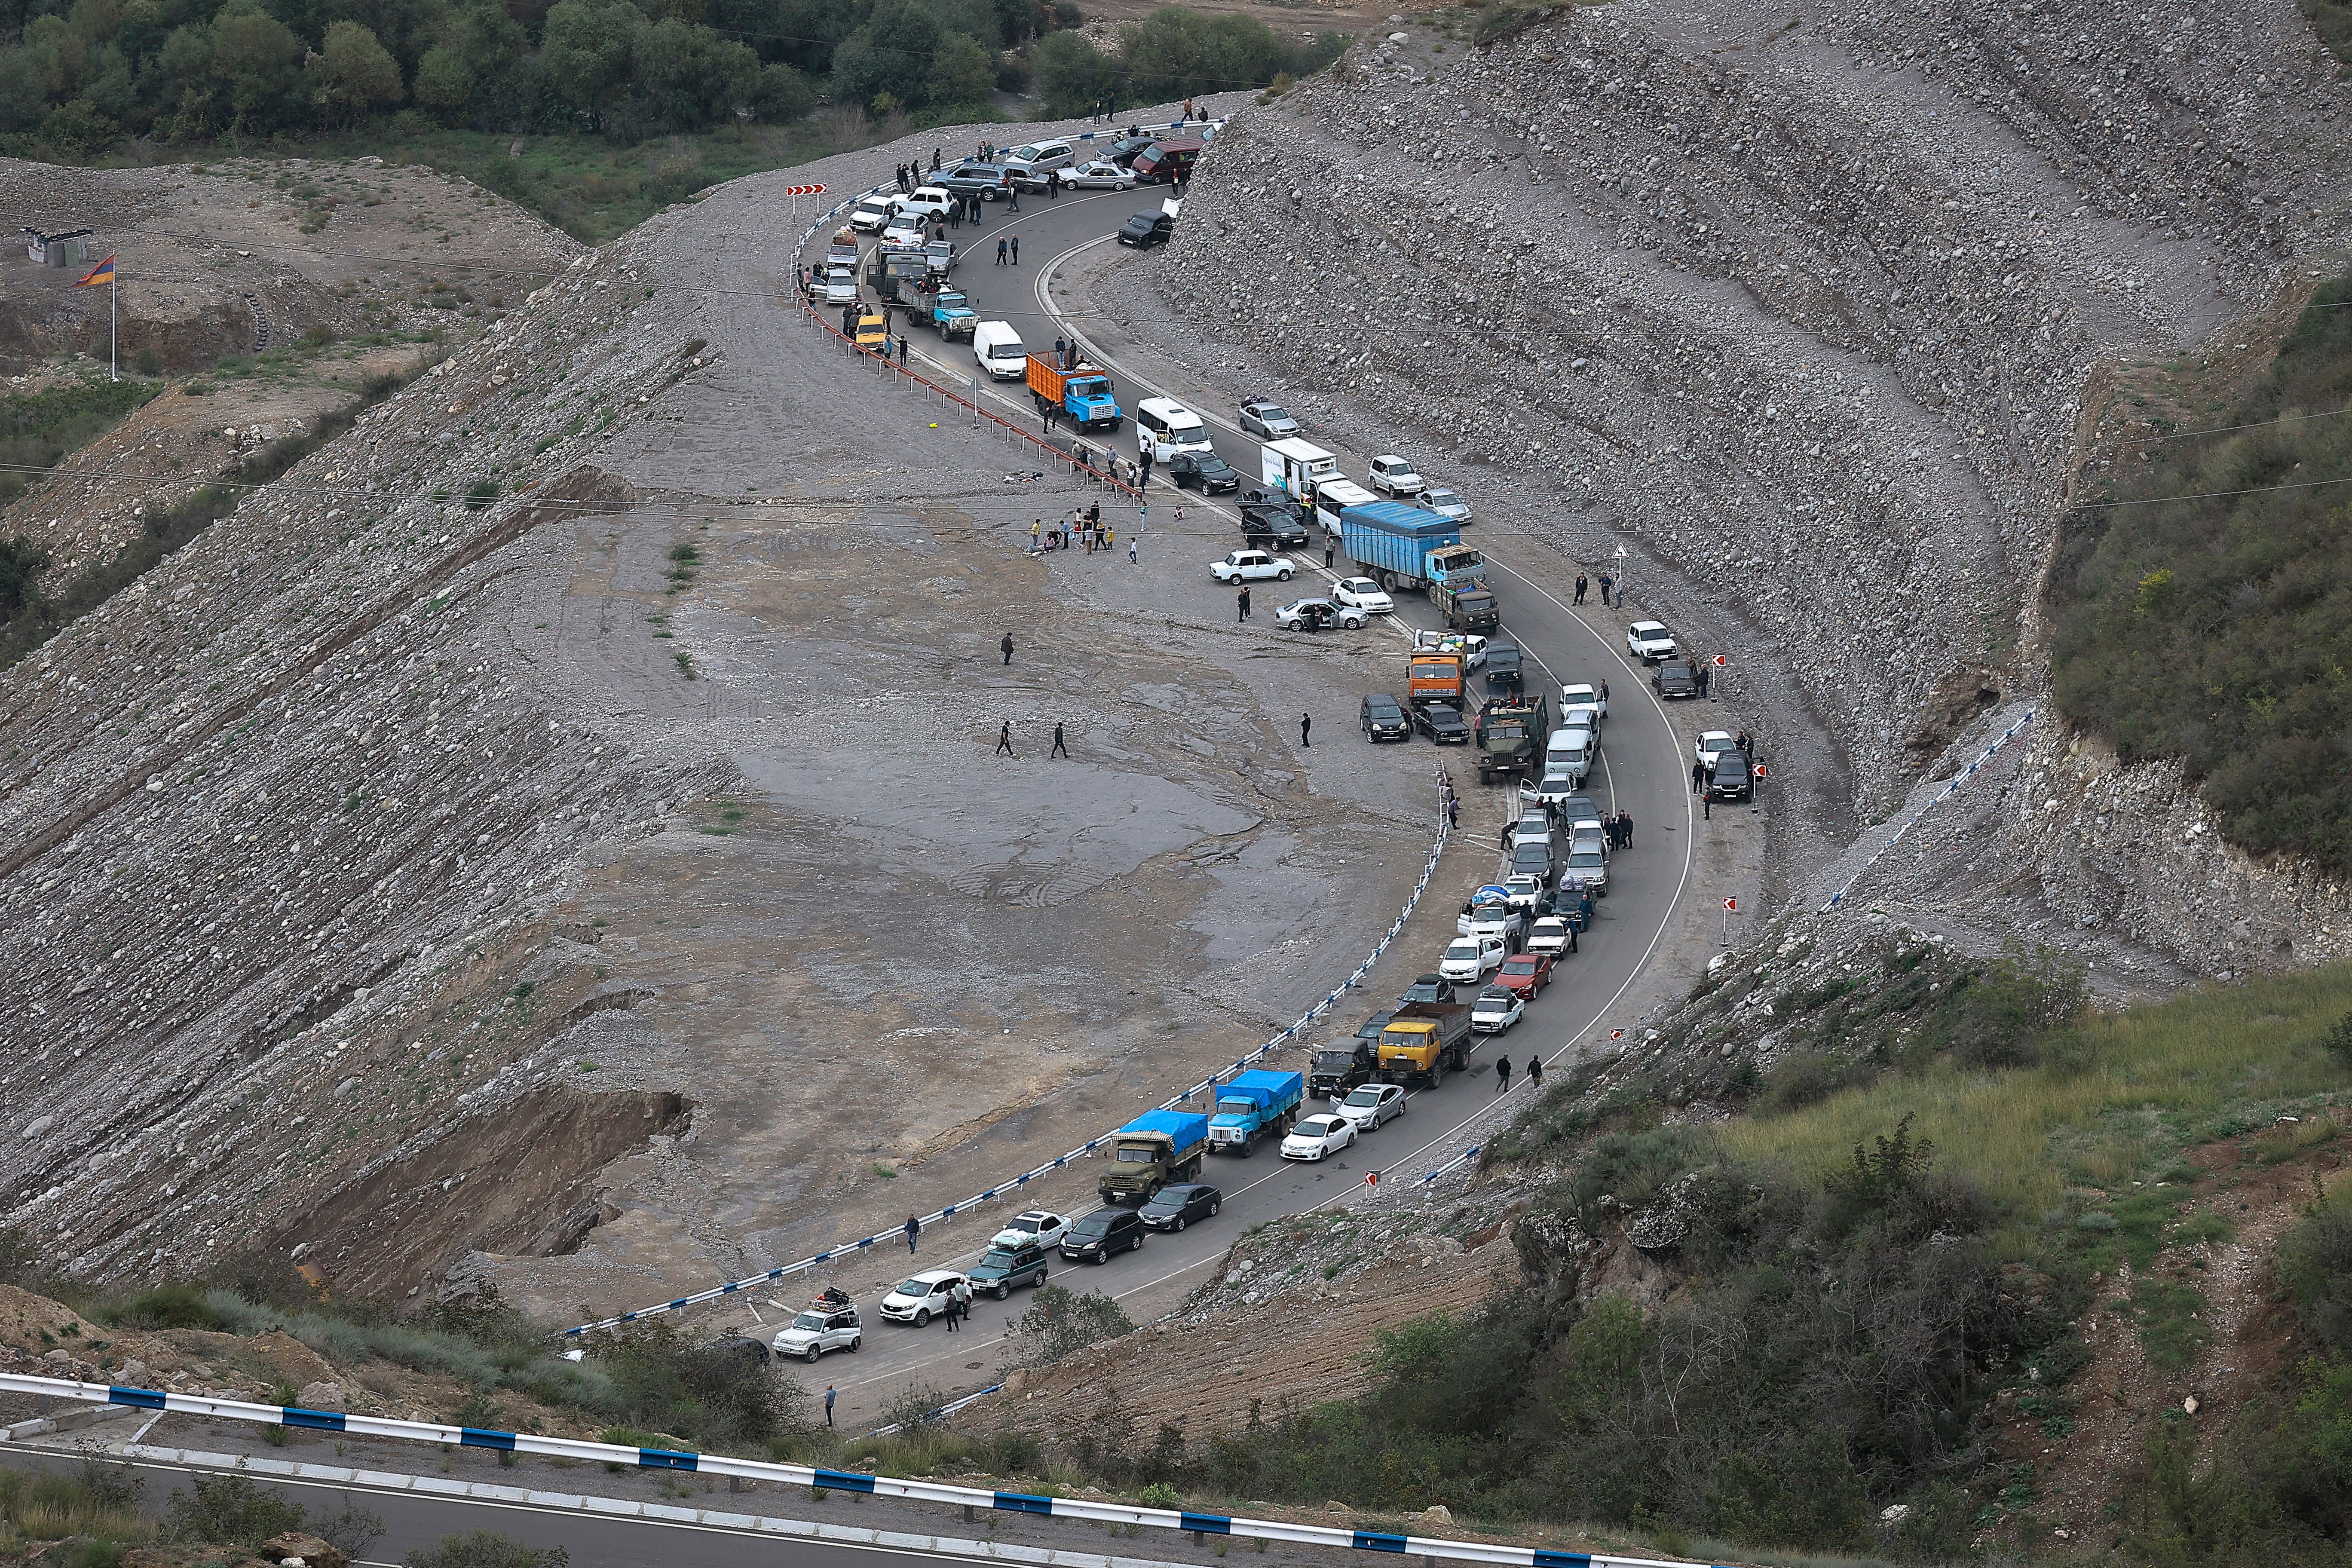 The convoy of cars carrying ethnic Armenians over mountain roads towards Armenia